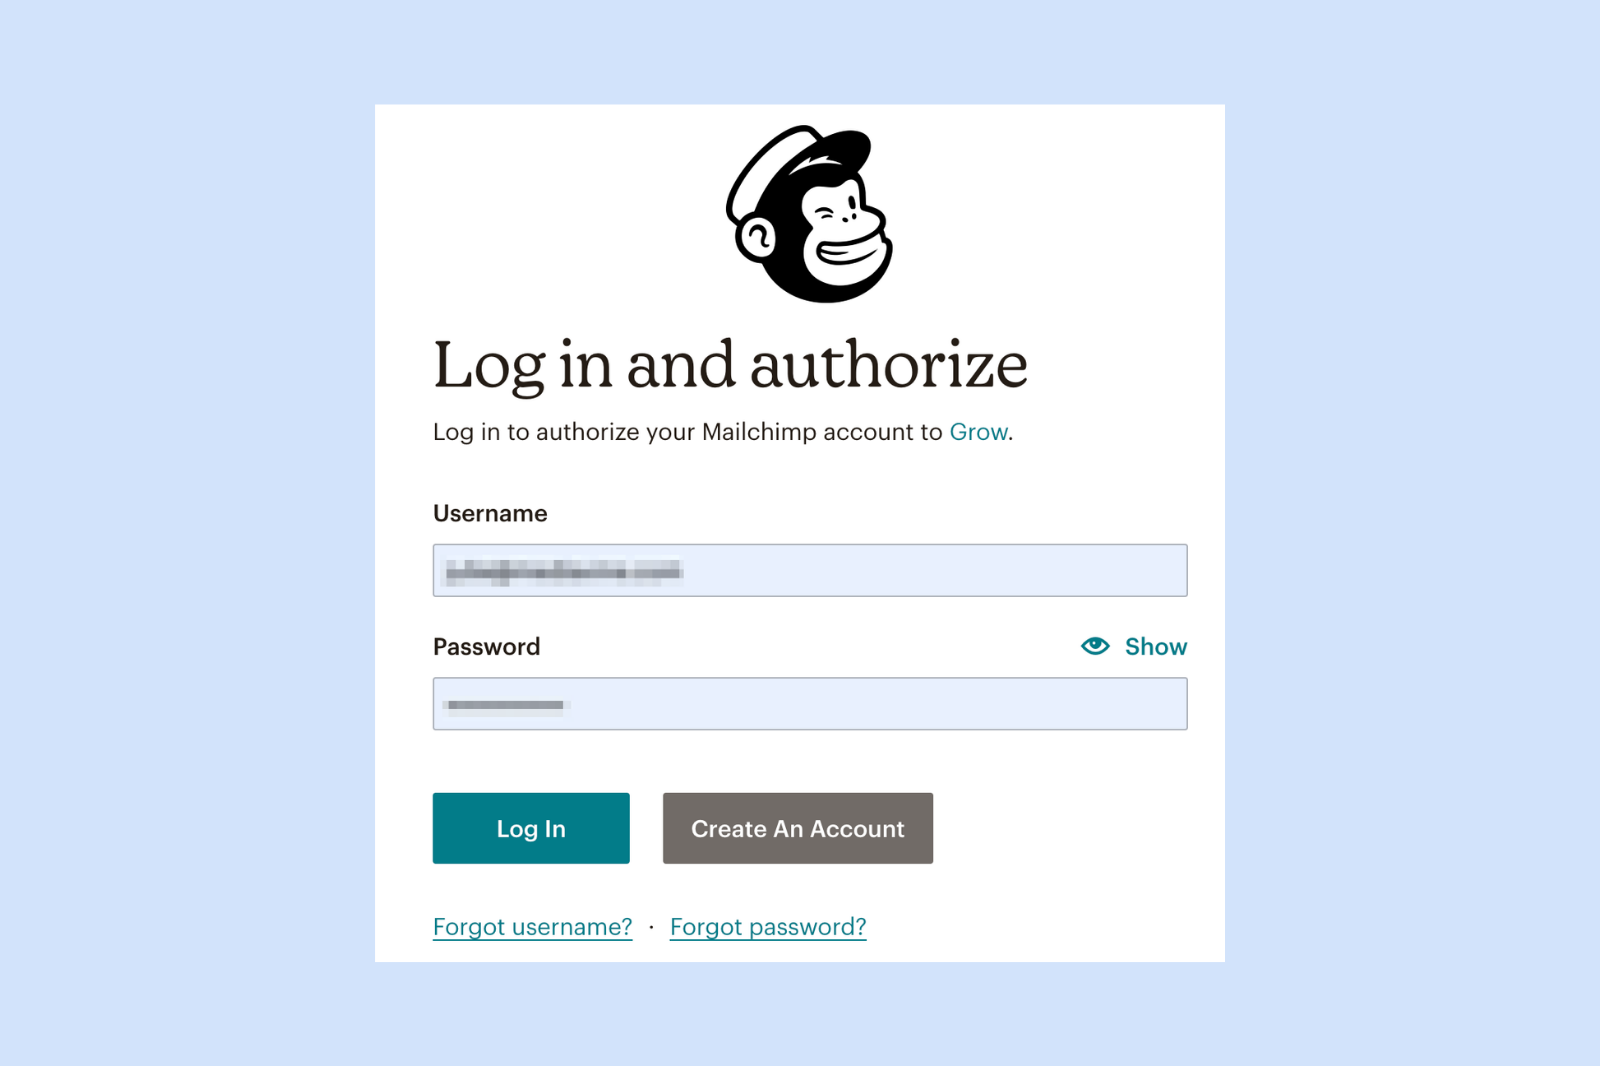 Mailchimp_Login_and_Authorize.png